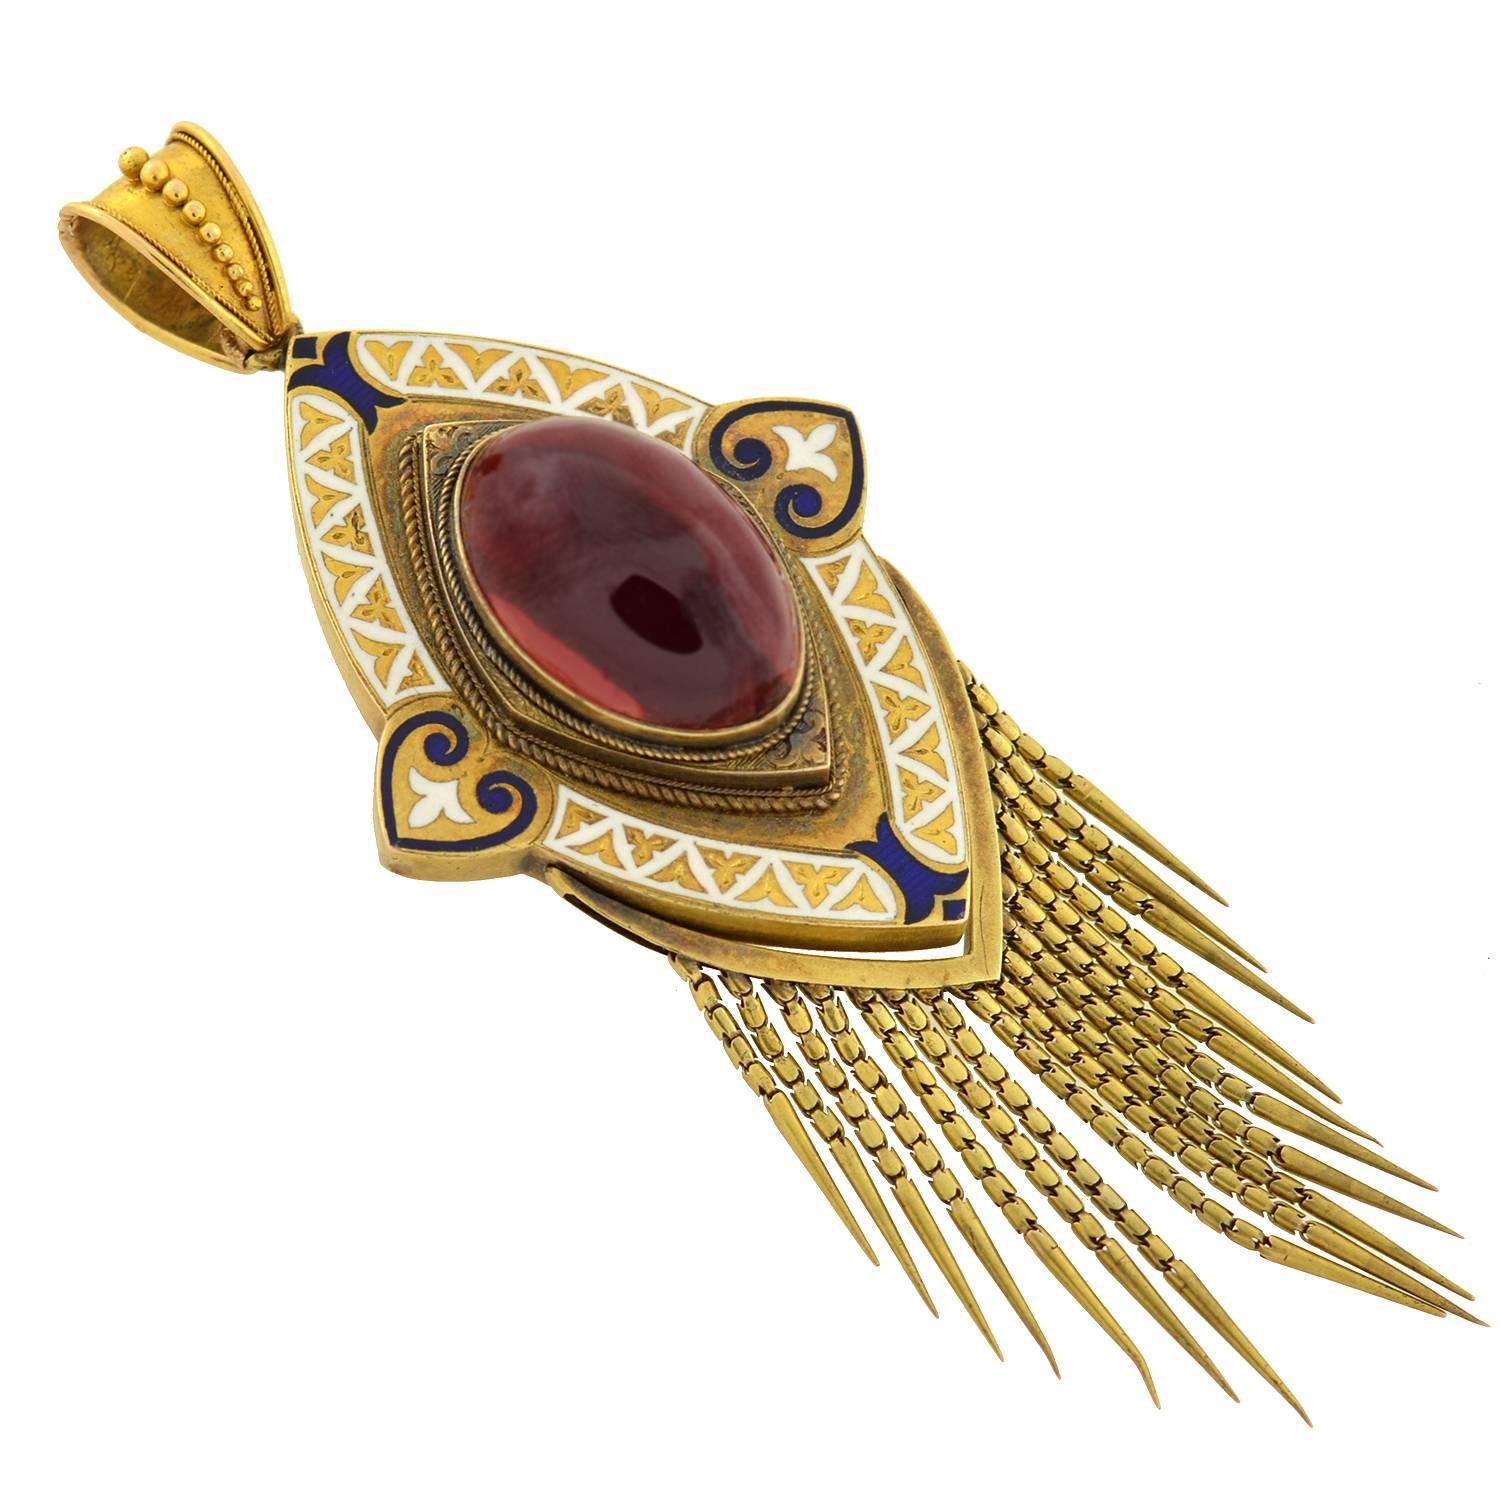 A fabulous garnet pendant from the Victorian (ca1880) era! This eye-shaped pendant is crafted in 15kt yellow gold and is detailed with gorgeous hand-etched details and navy and white enamel. Resting in the center of the piece is a very large